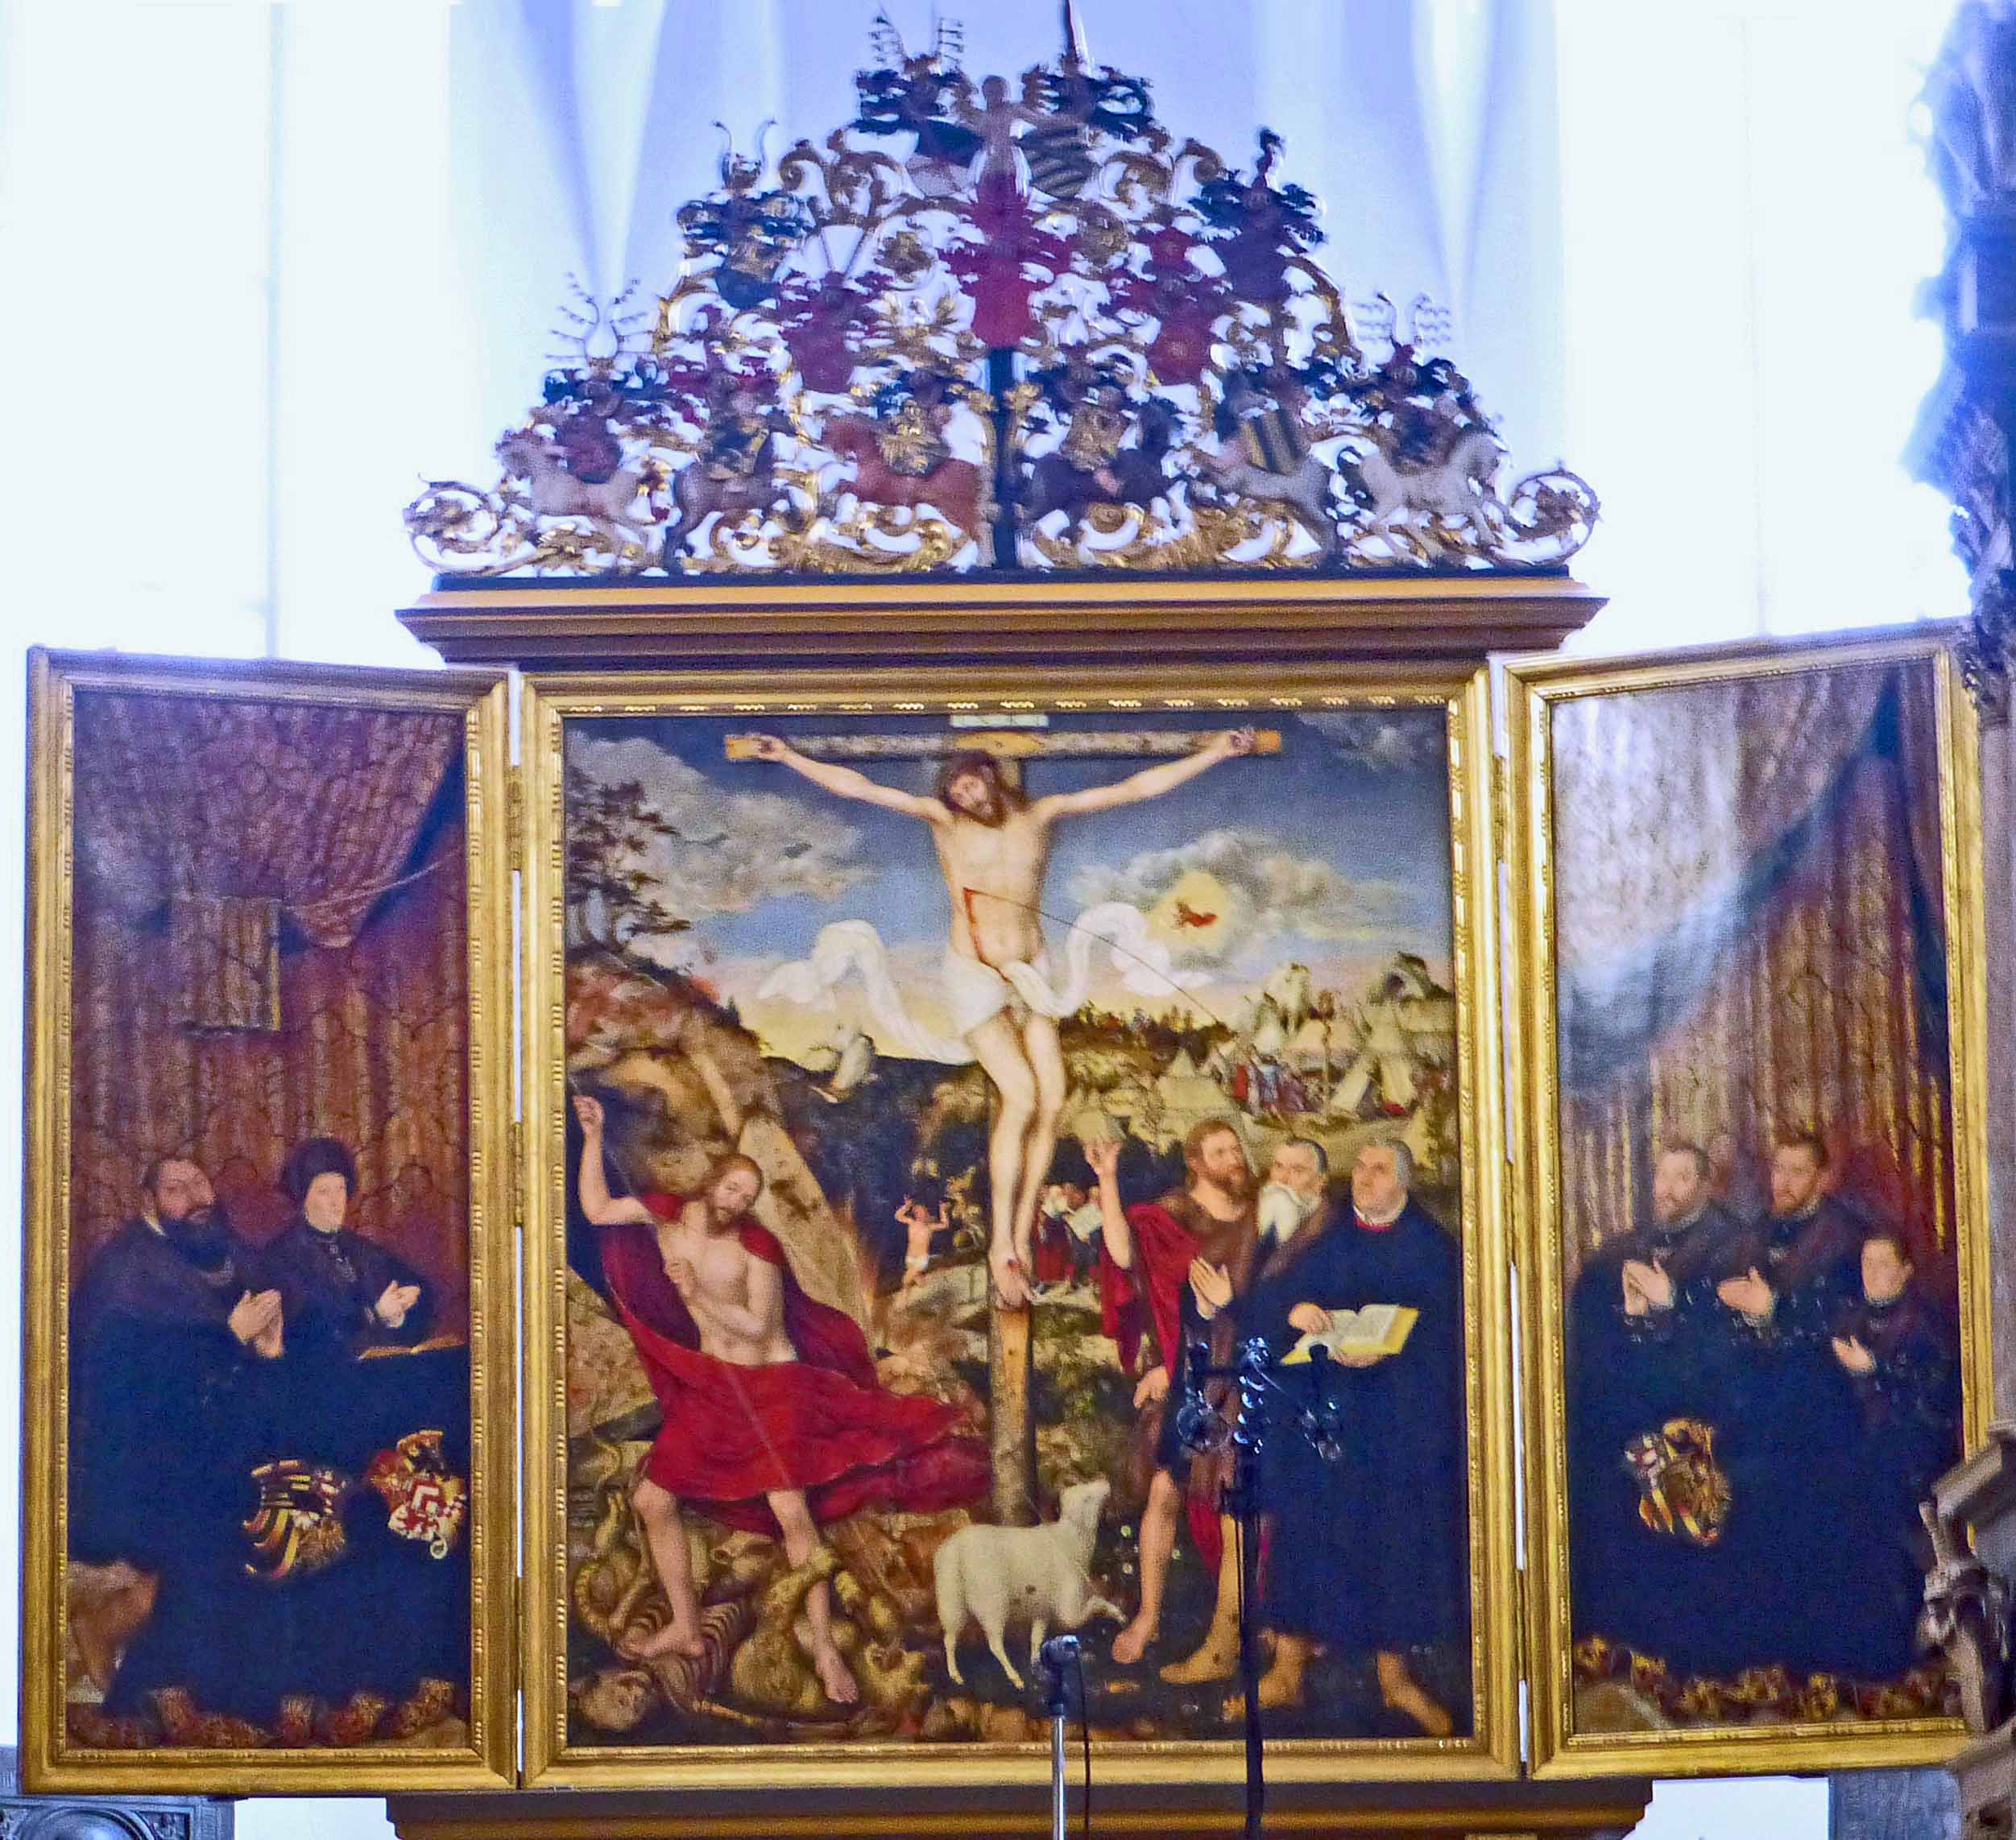 The triptych (1555) in the Church of St. Peter and Paul has been hailed as the single most important visual monument of German